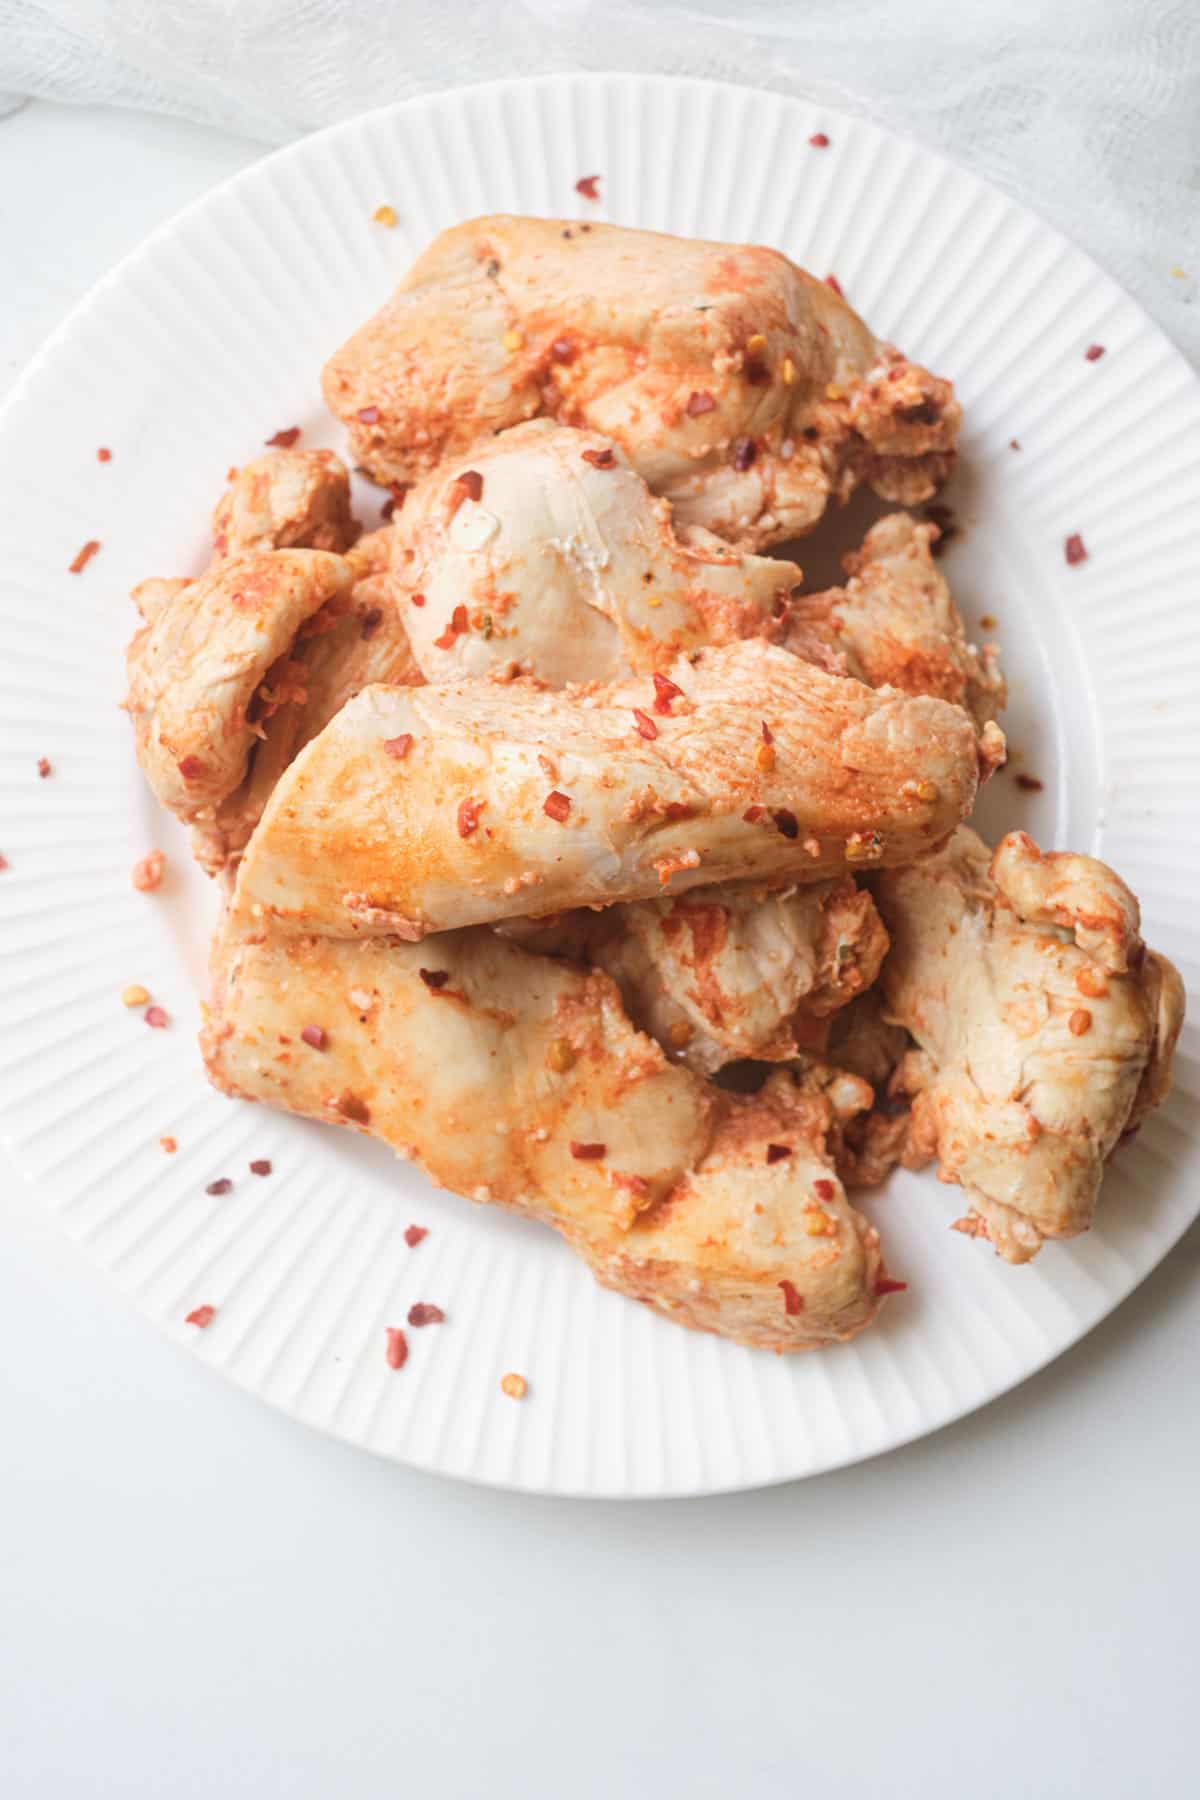 close up view of the compeleted instant pot chicken tenders recipe